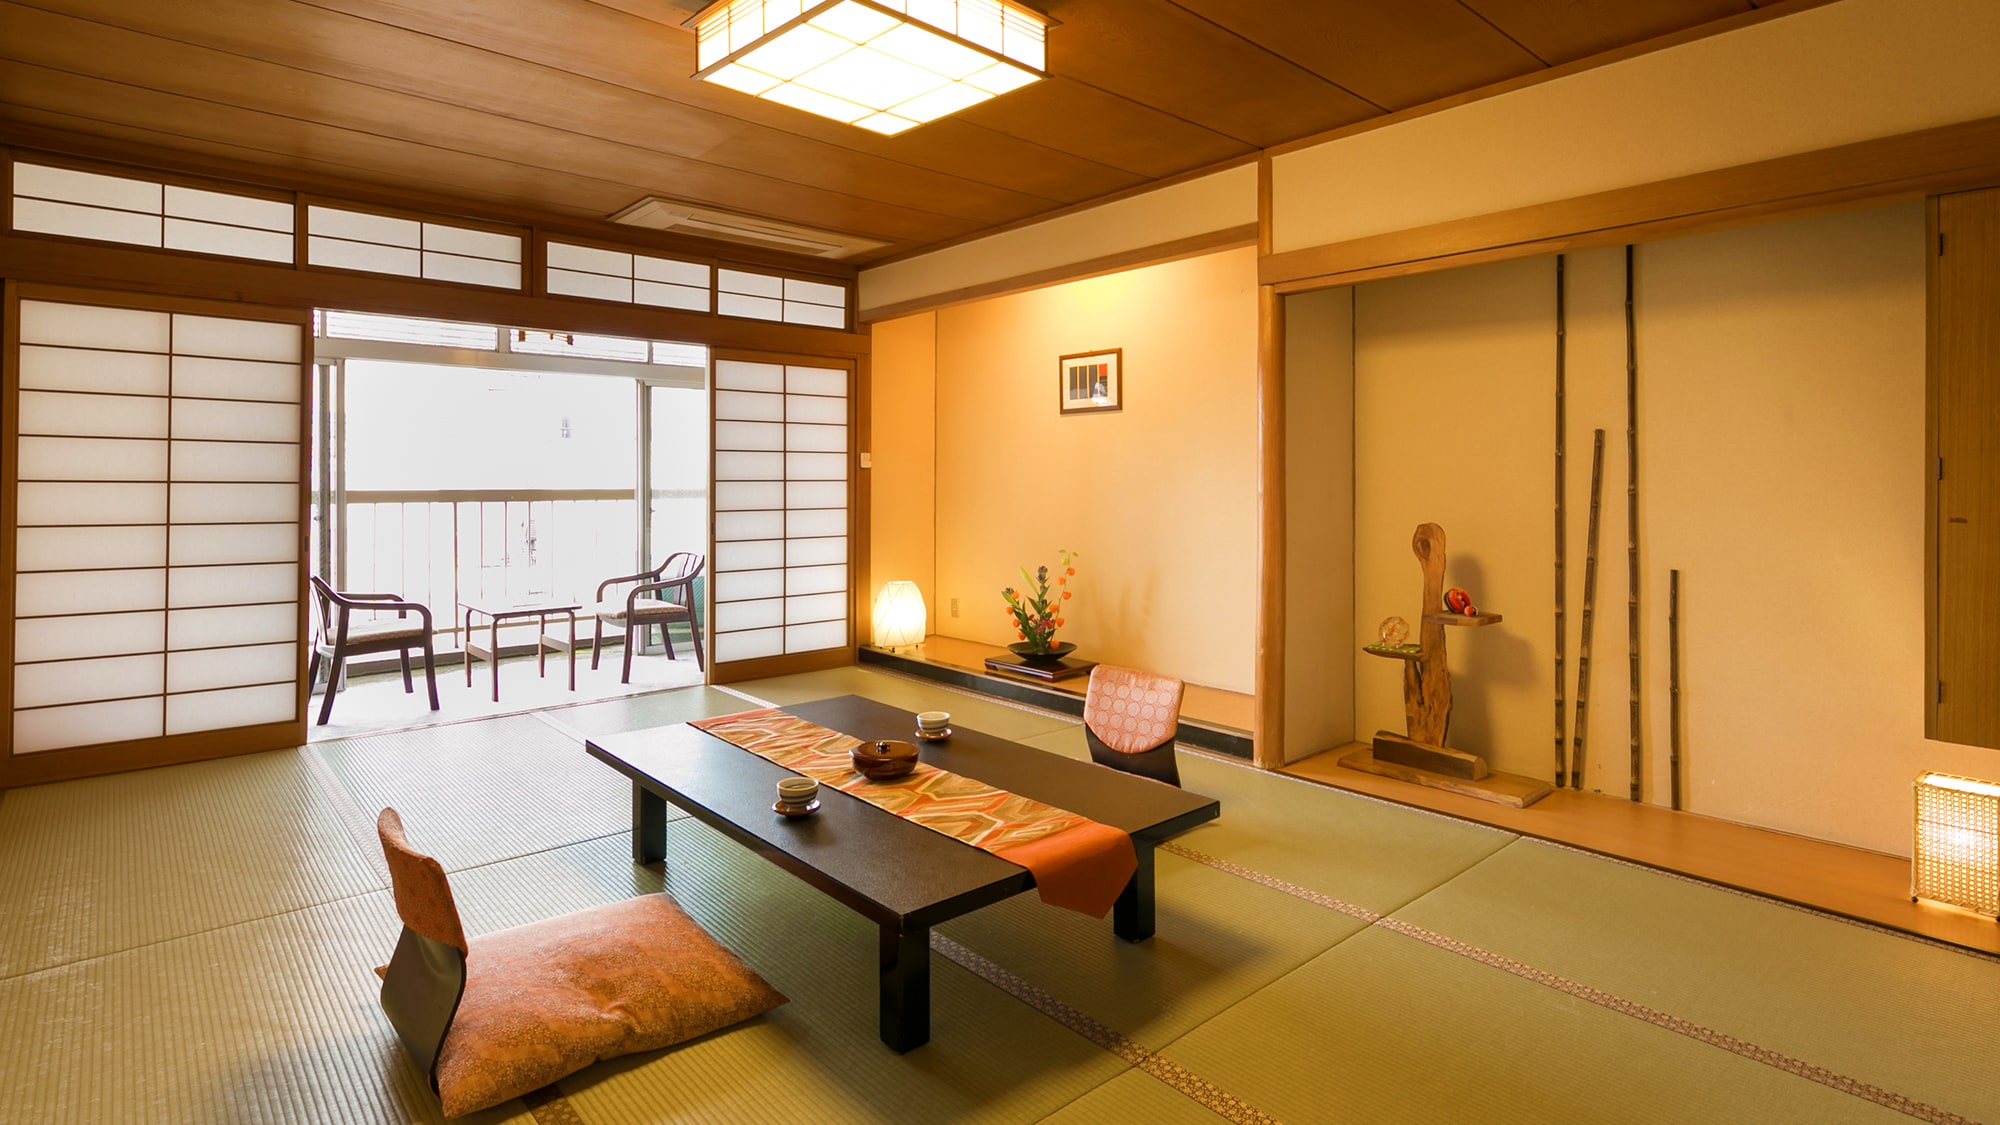 ■ Japanese-style room 12 tatami mats ■ A spacious and spacious space for a good night's sleep ♪